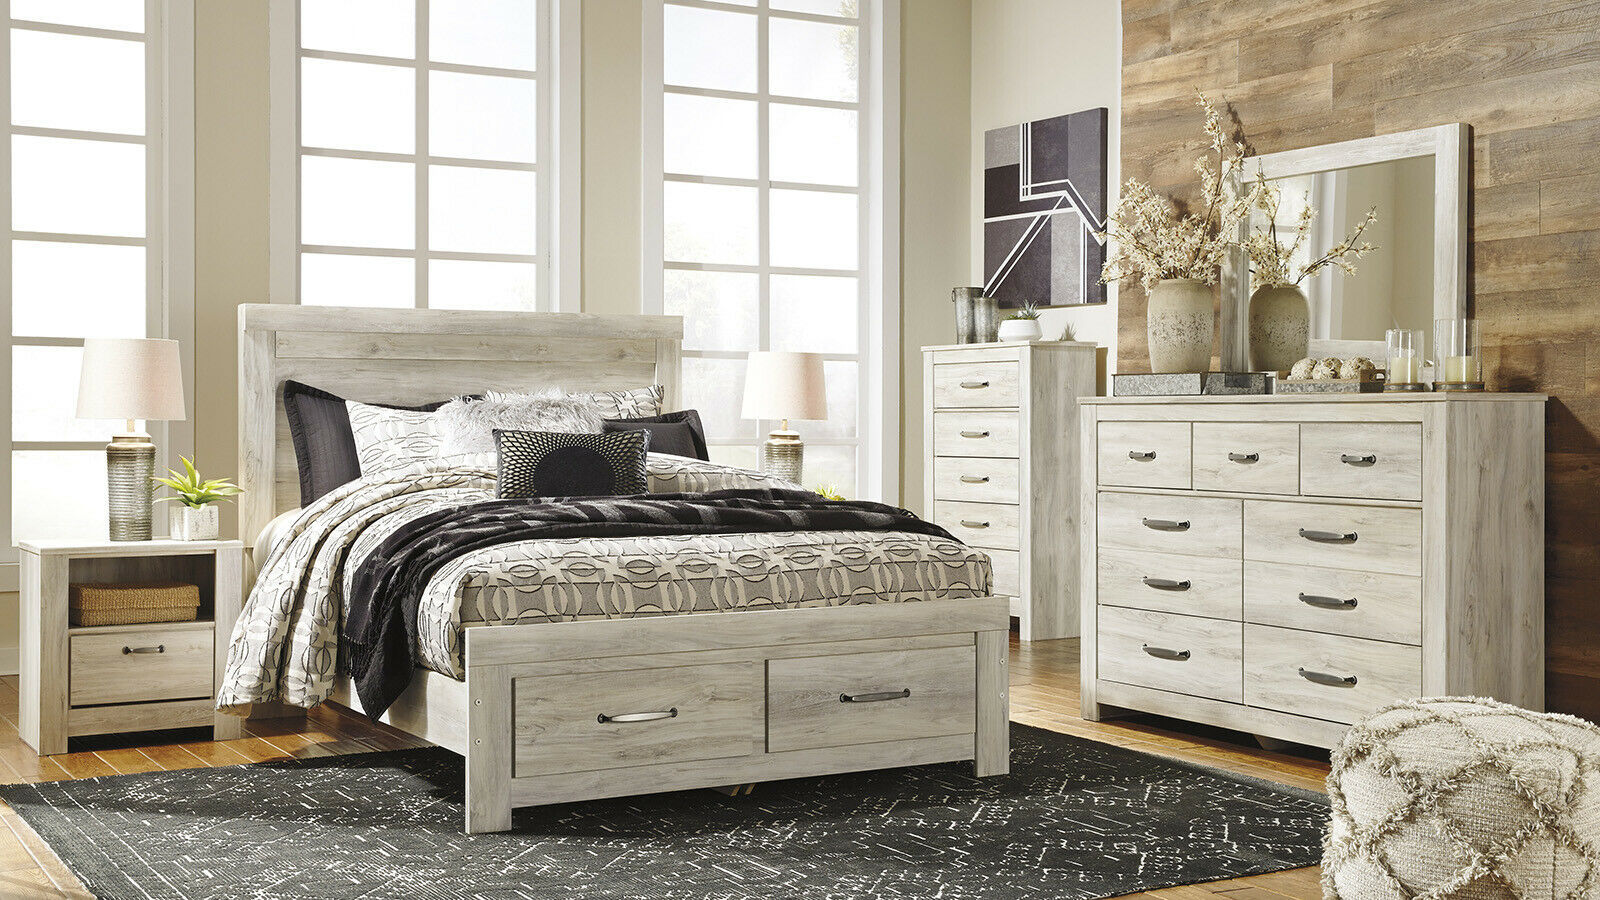 NEW Rustic Off-White Finish Bedroom Furniture - 5pcs King ...